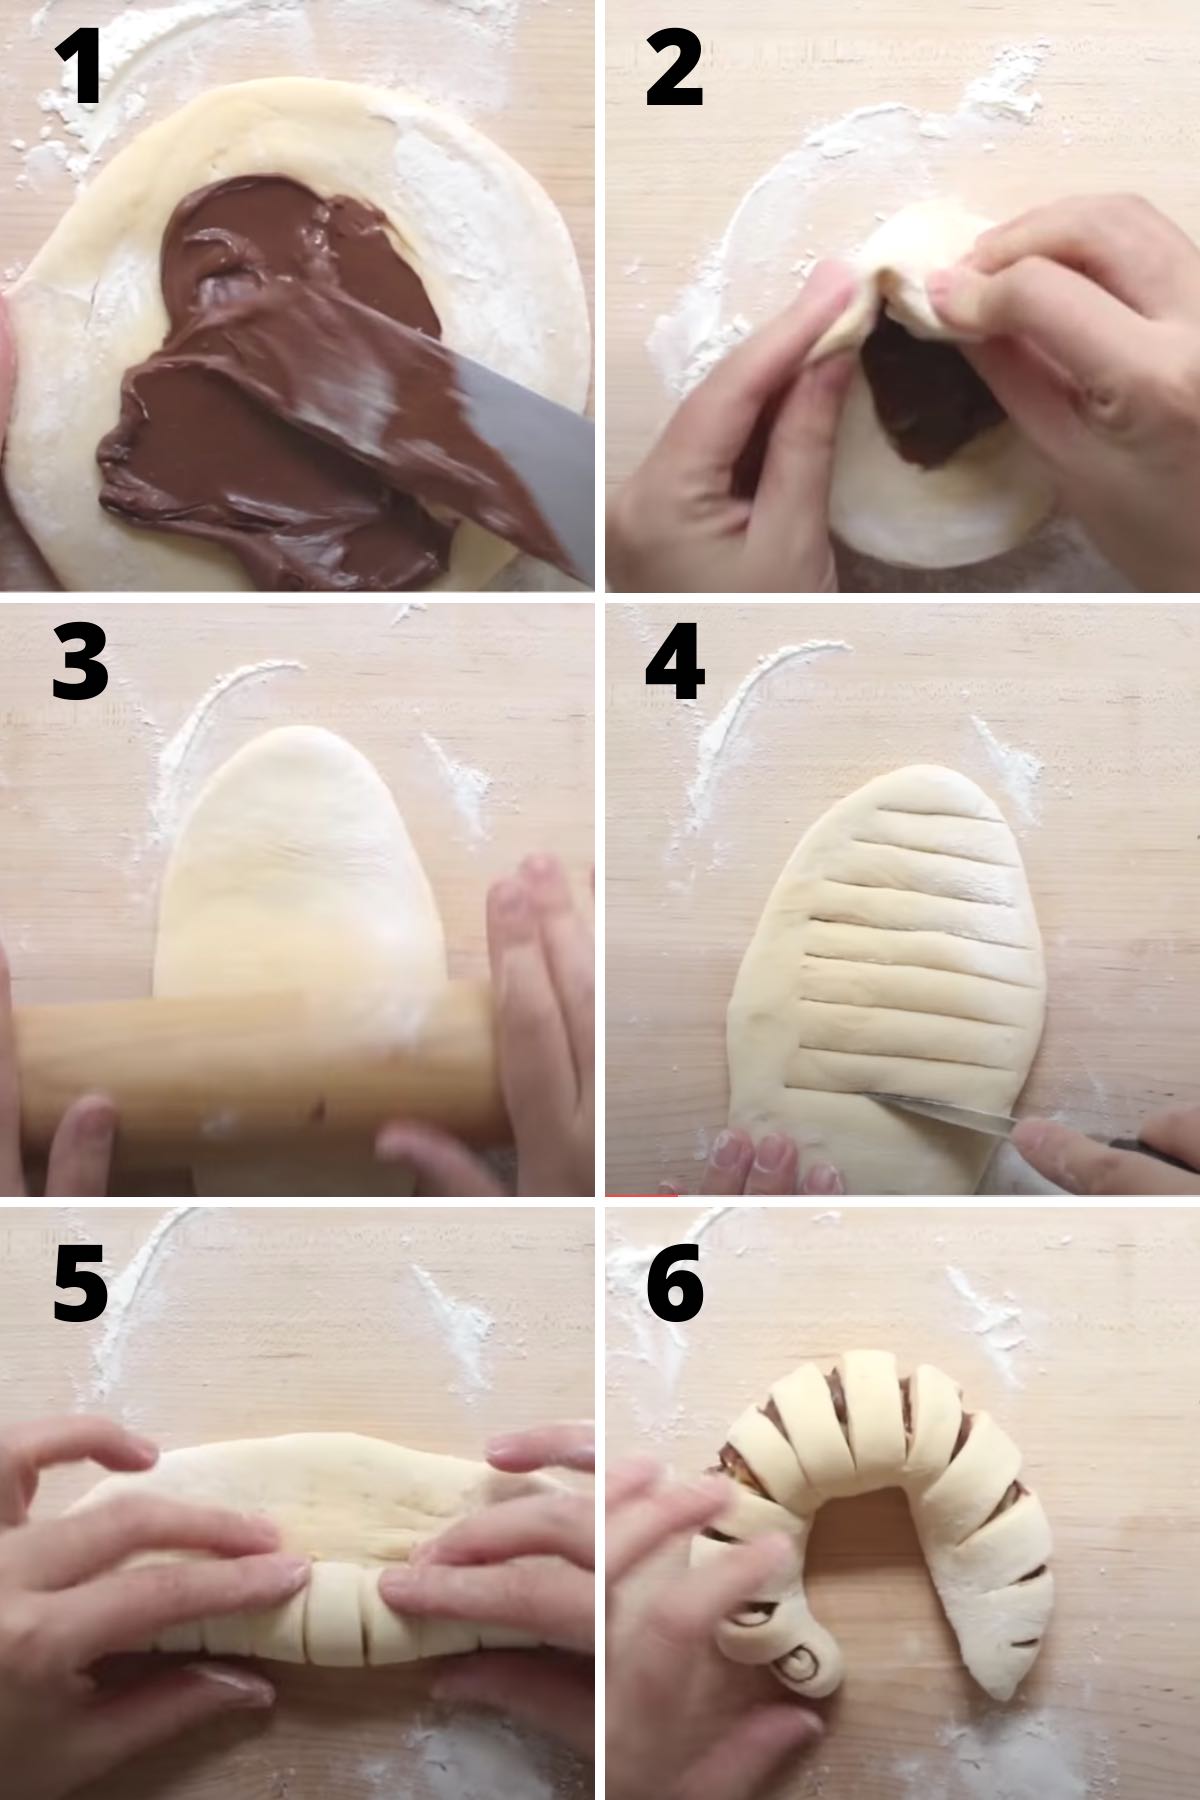 Process steps for making Nutella braided bread